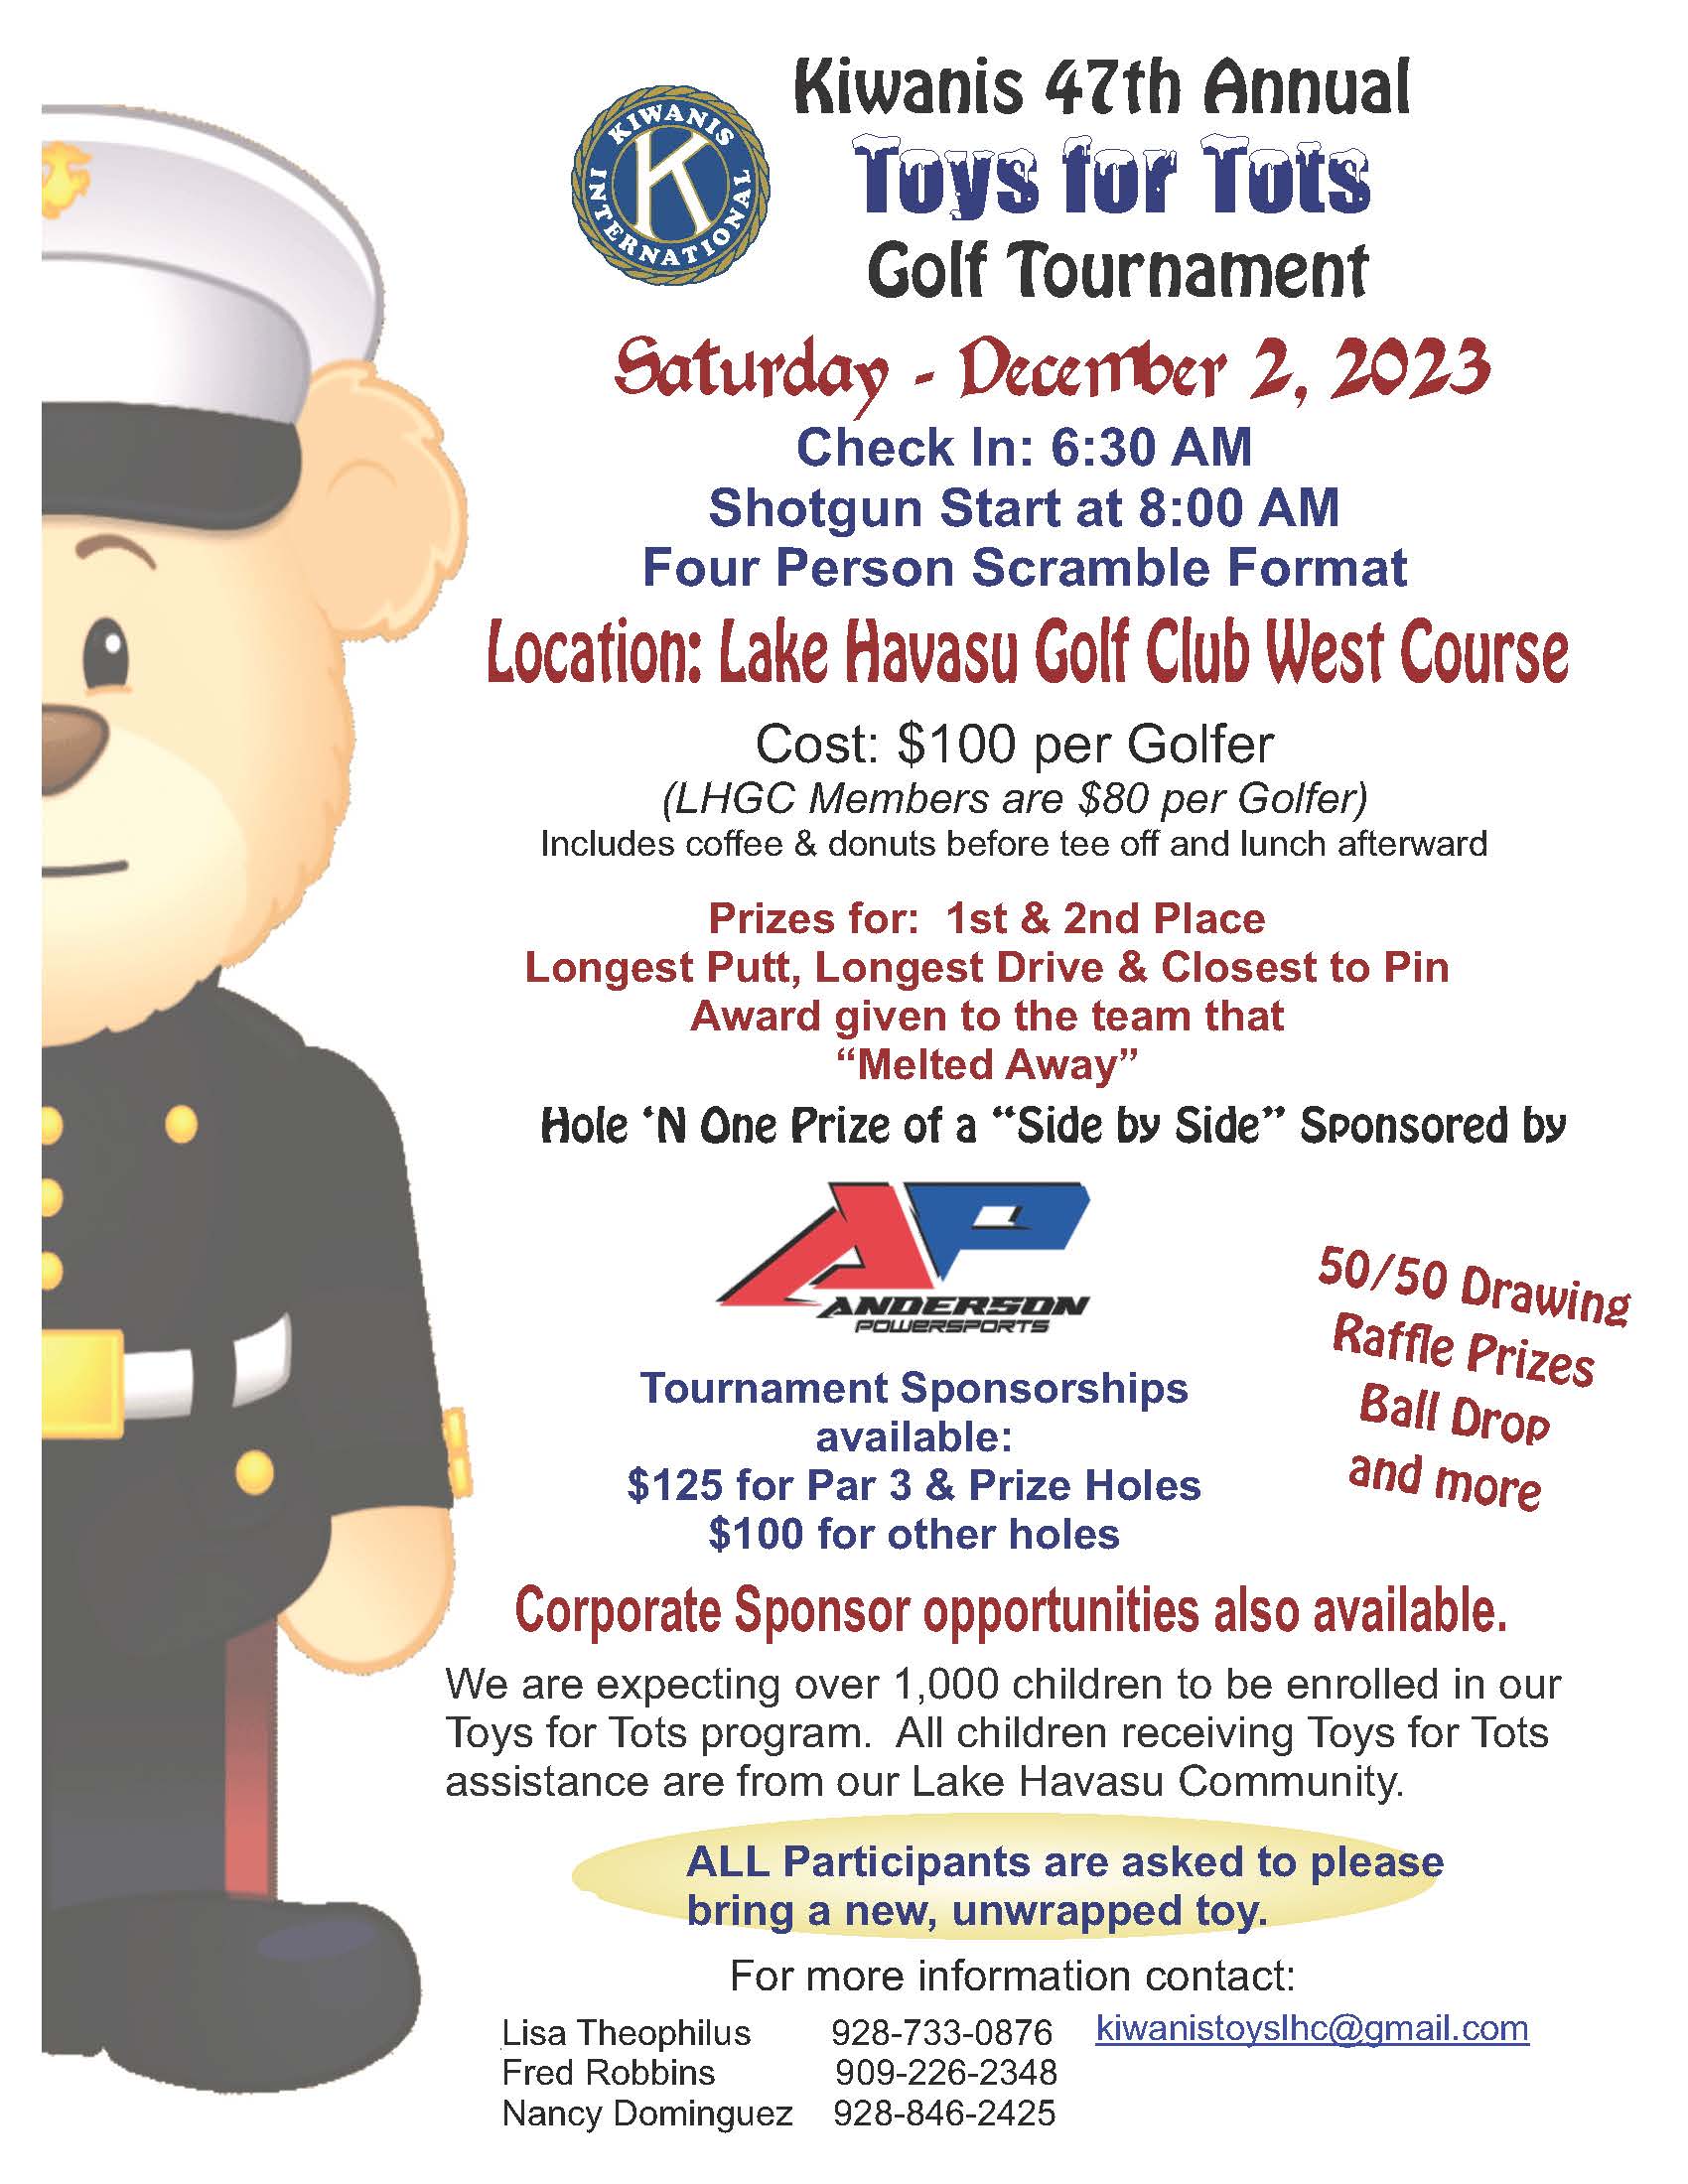 Kiwanis 47th Annual Toys for Tots Golf Tournament